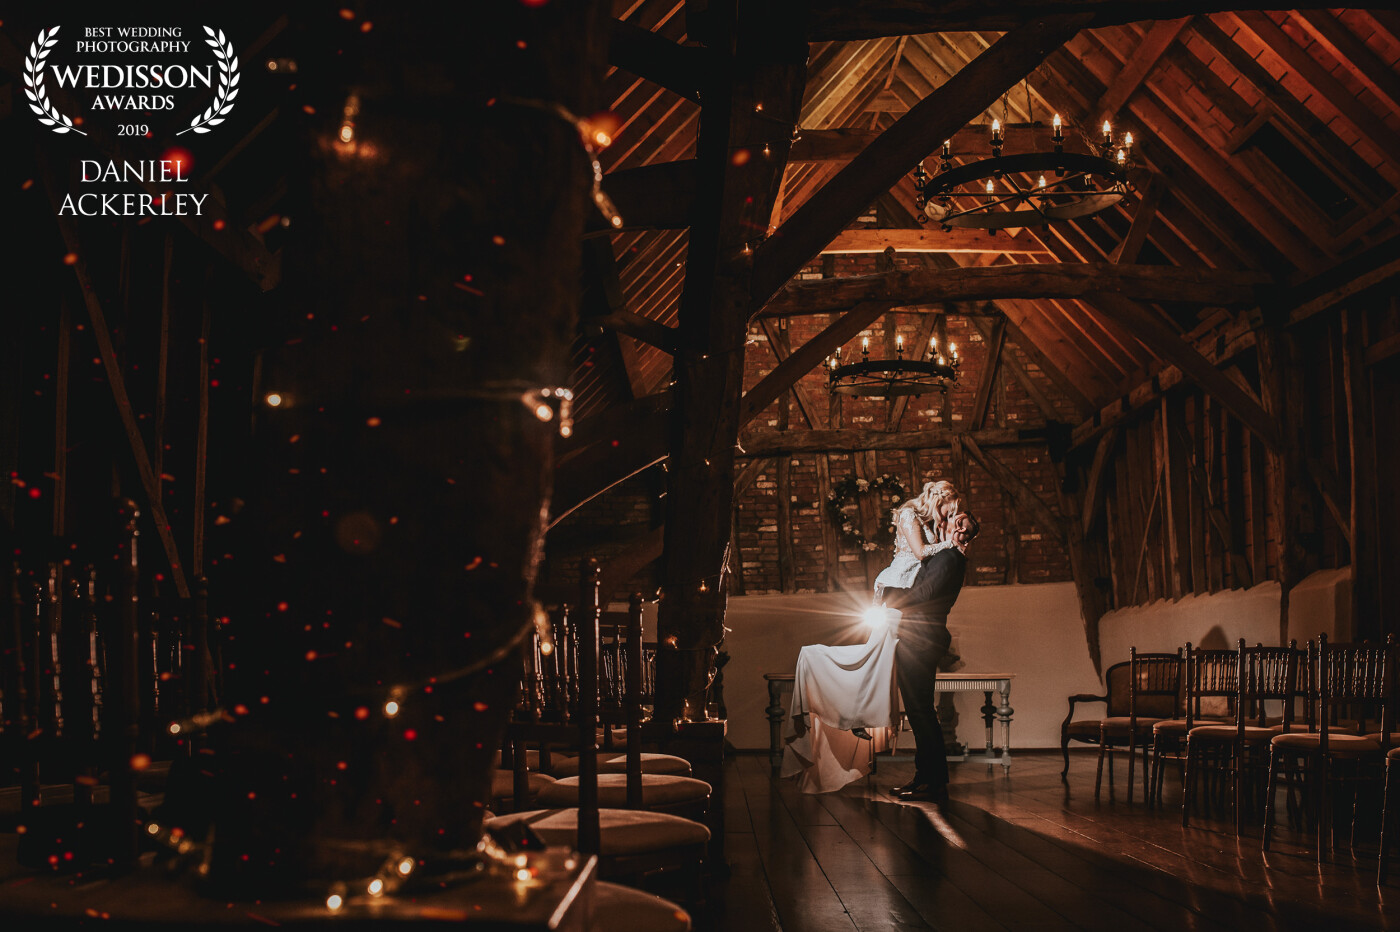 Jody & Derry had a really magical wedding, the barn was only used for the ceremony, so we decided to use it again for some evening portraits. I two lights to capture this, one behind to create the starburst effect, and the other camera left (hidden by the wooden pillar) to light them having this moment. 